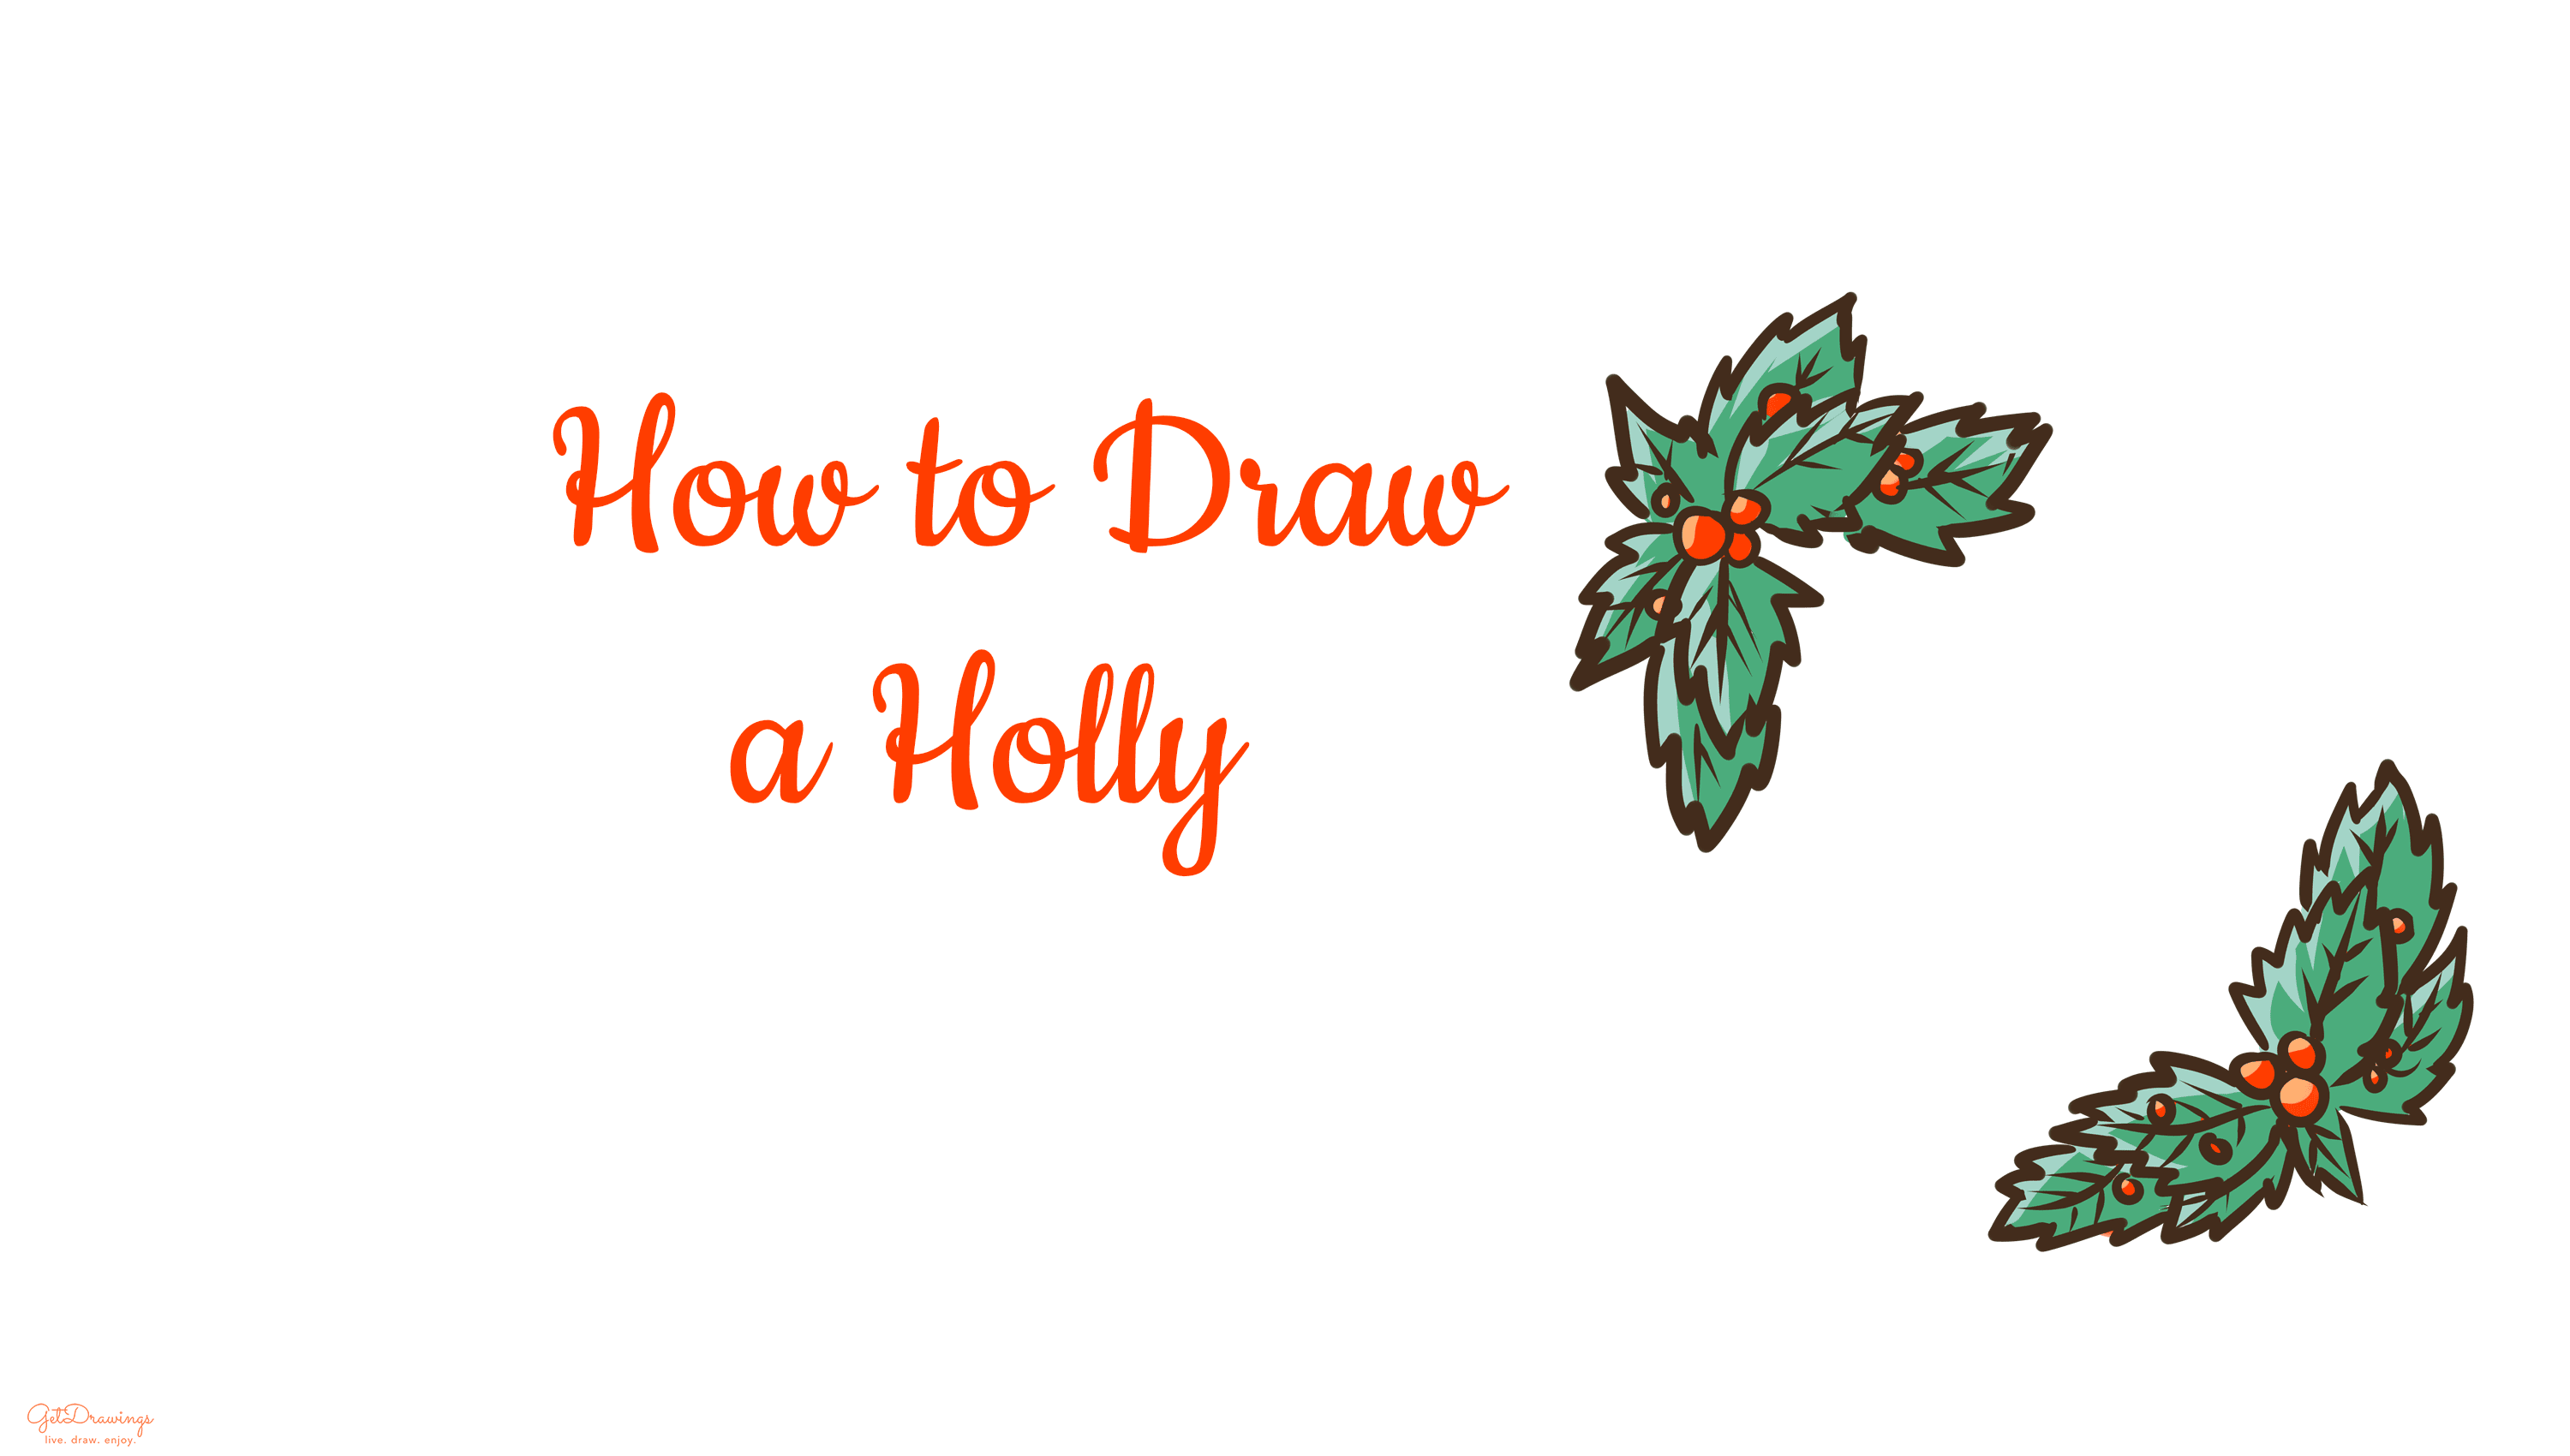 How to Draw a Holly